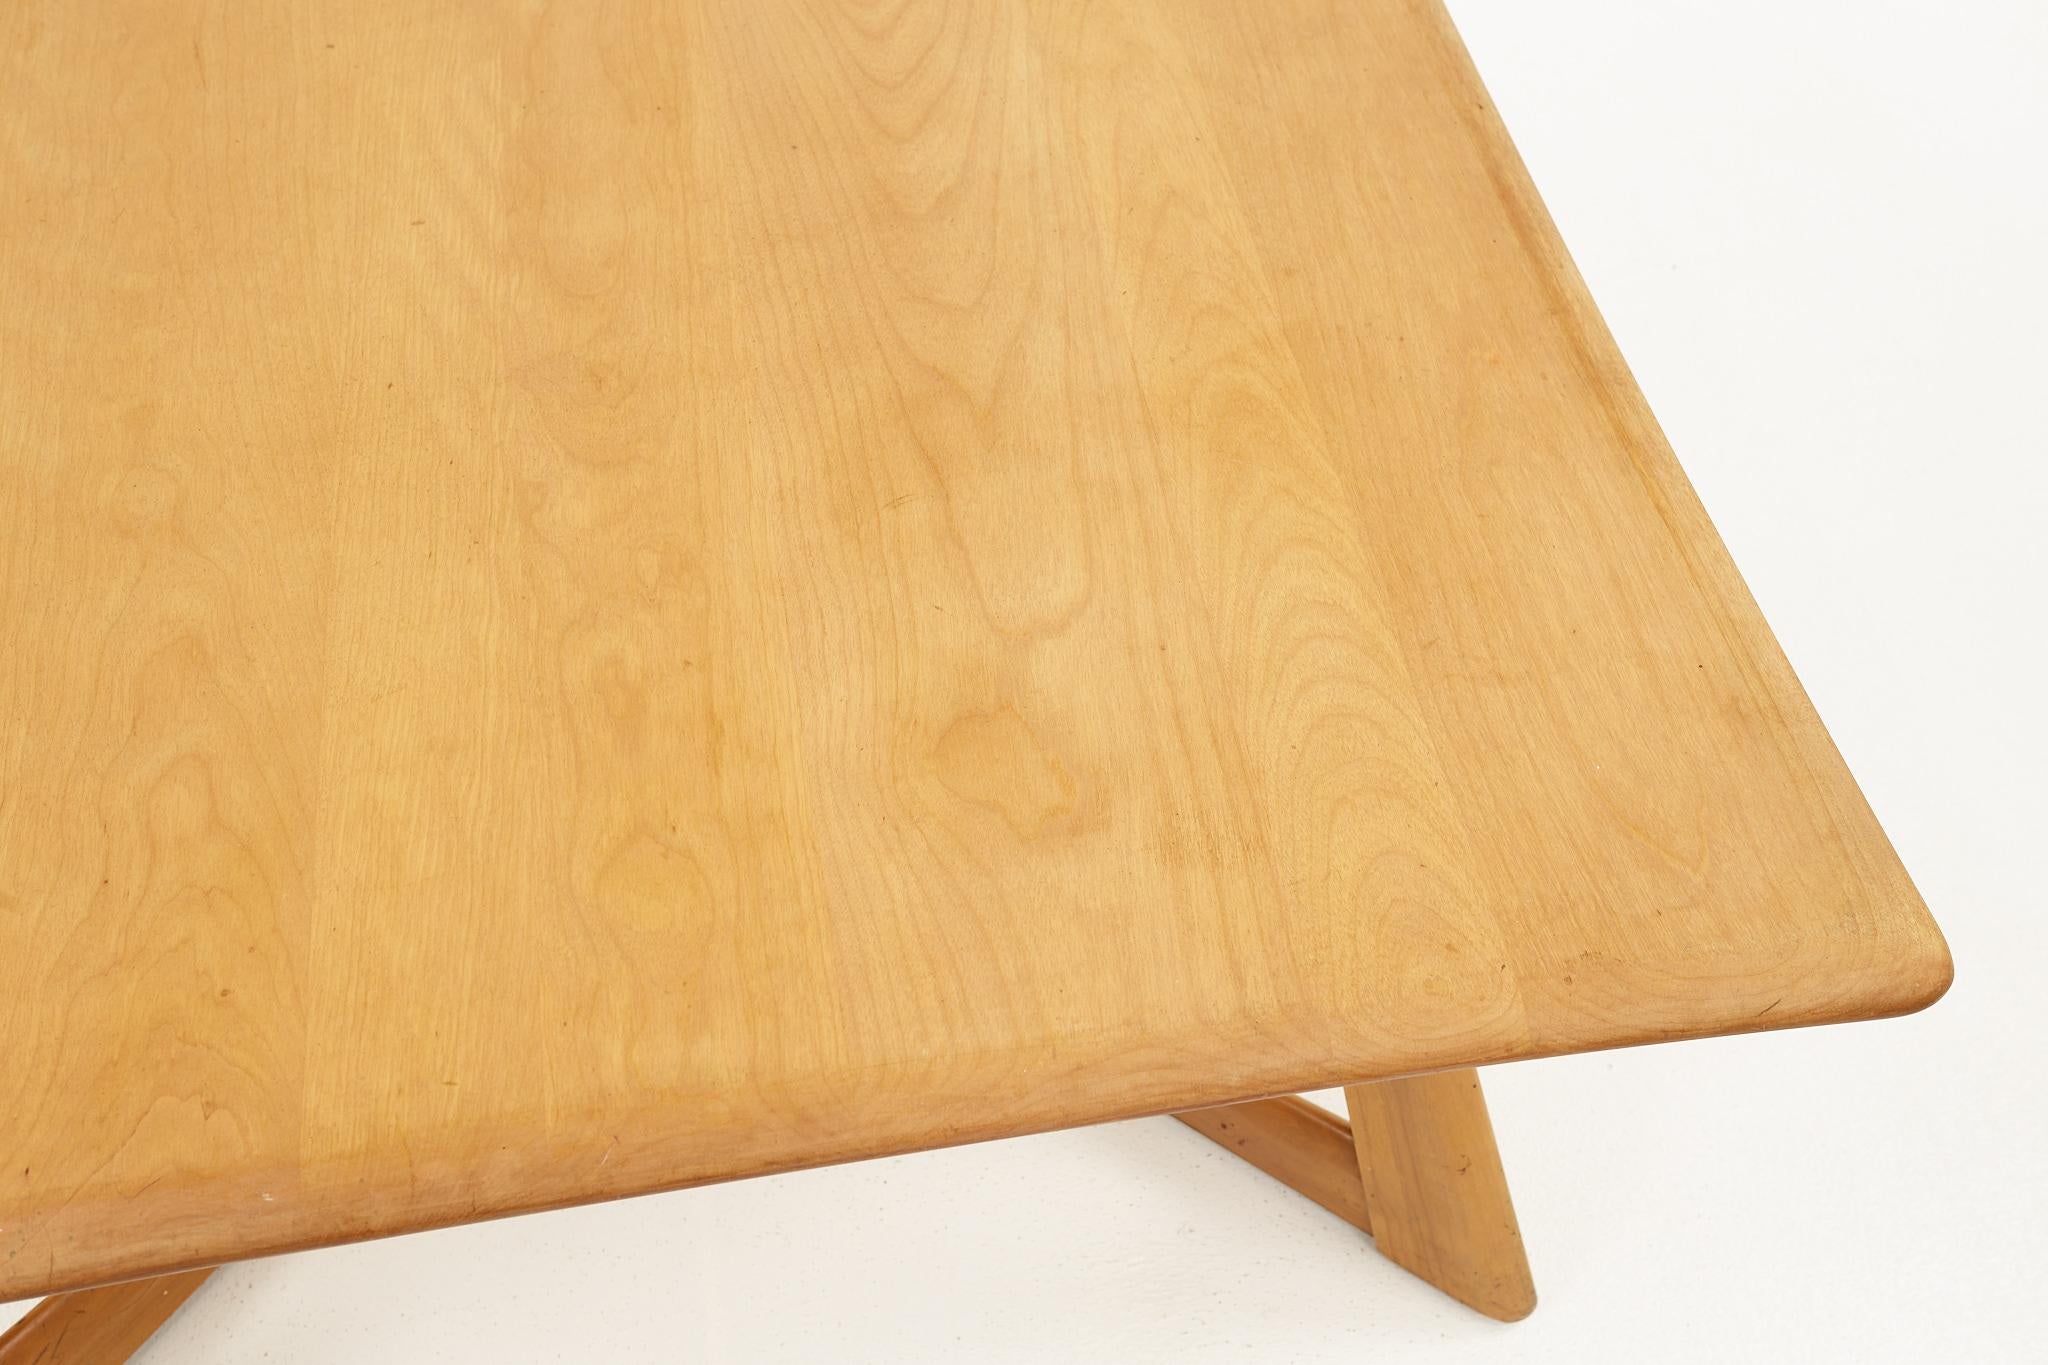 Wood Heywood Wakefield Mid Century Blonde X Base Square Coffee Table For Sale